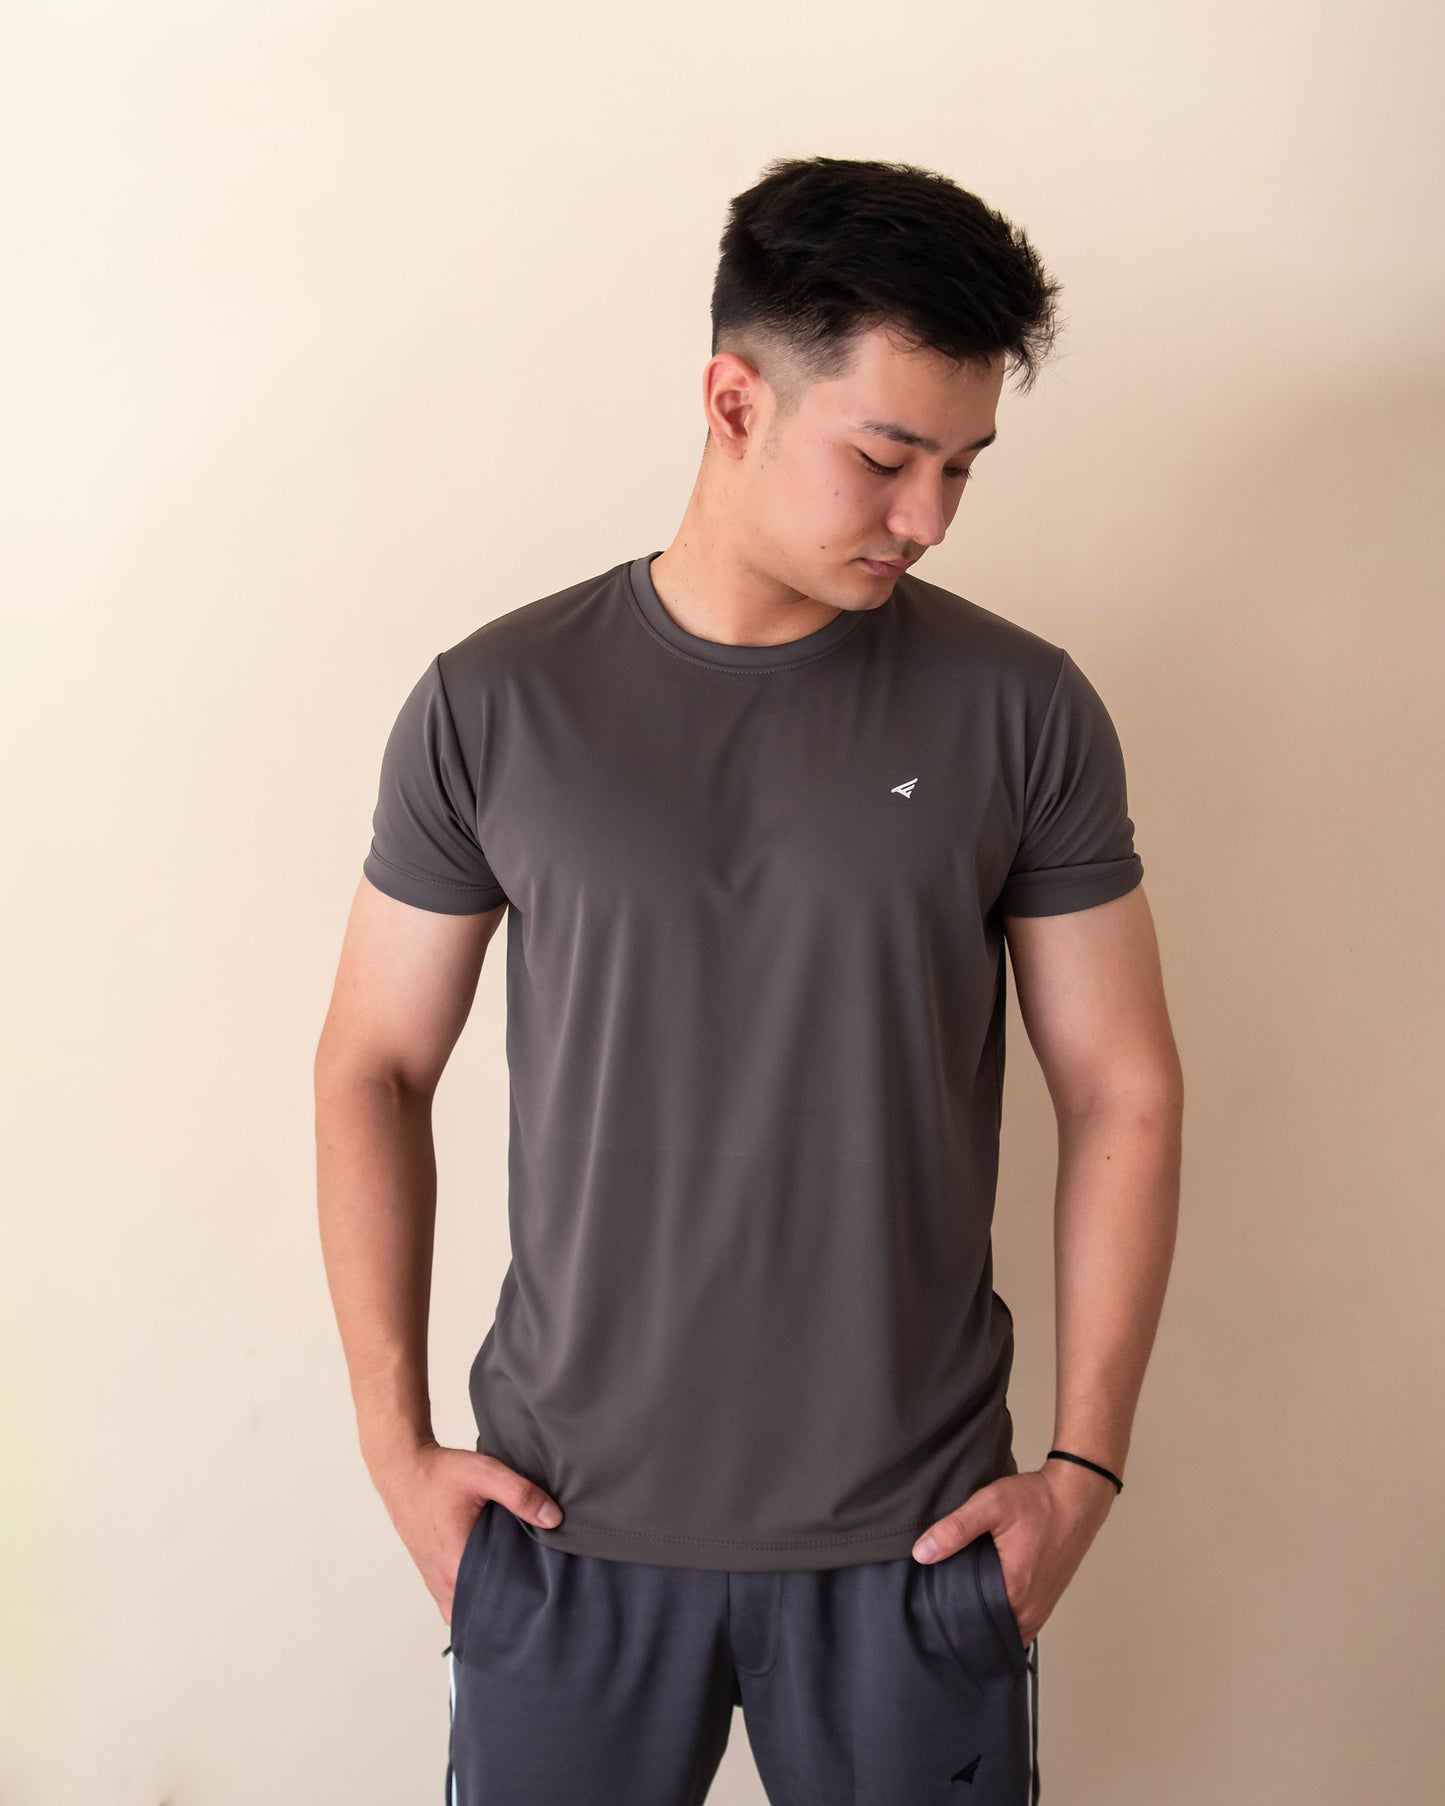 ACTIVE WEAR DRY-FIT T-SHIRT - OMUS